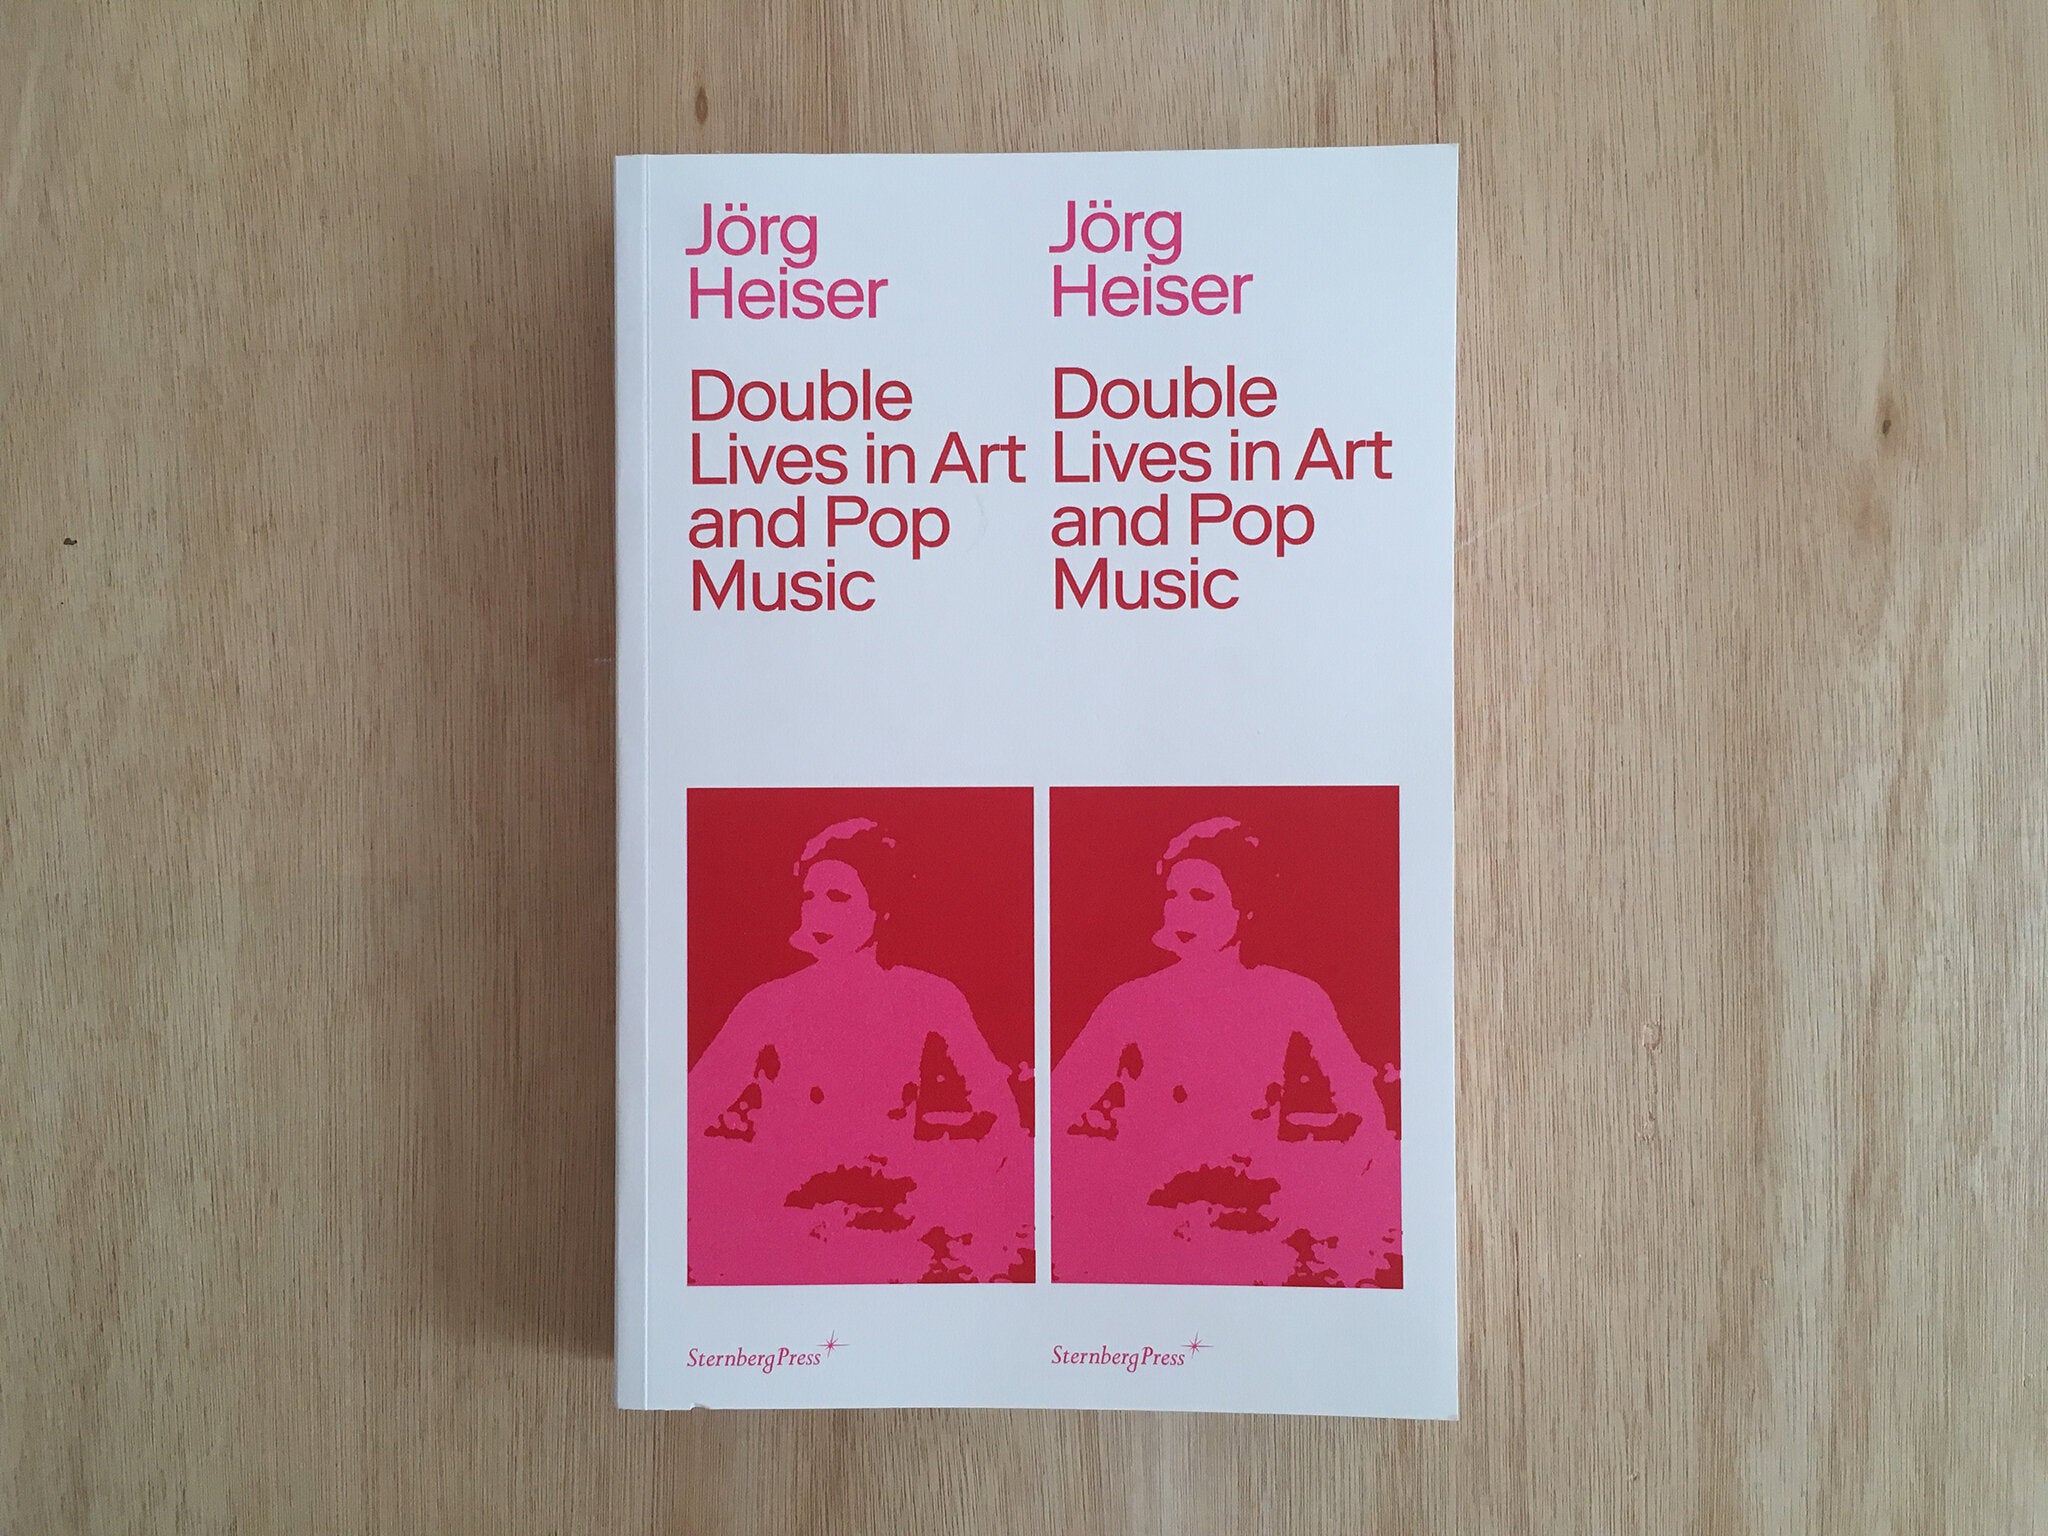 DOUBLE LIVES IN ART AND POP MUSIC by Jörg Heiser